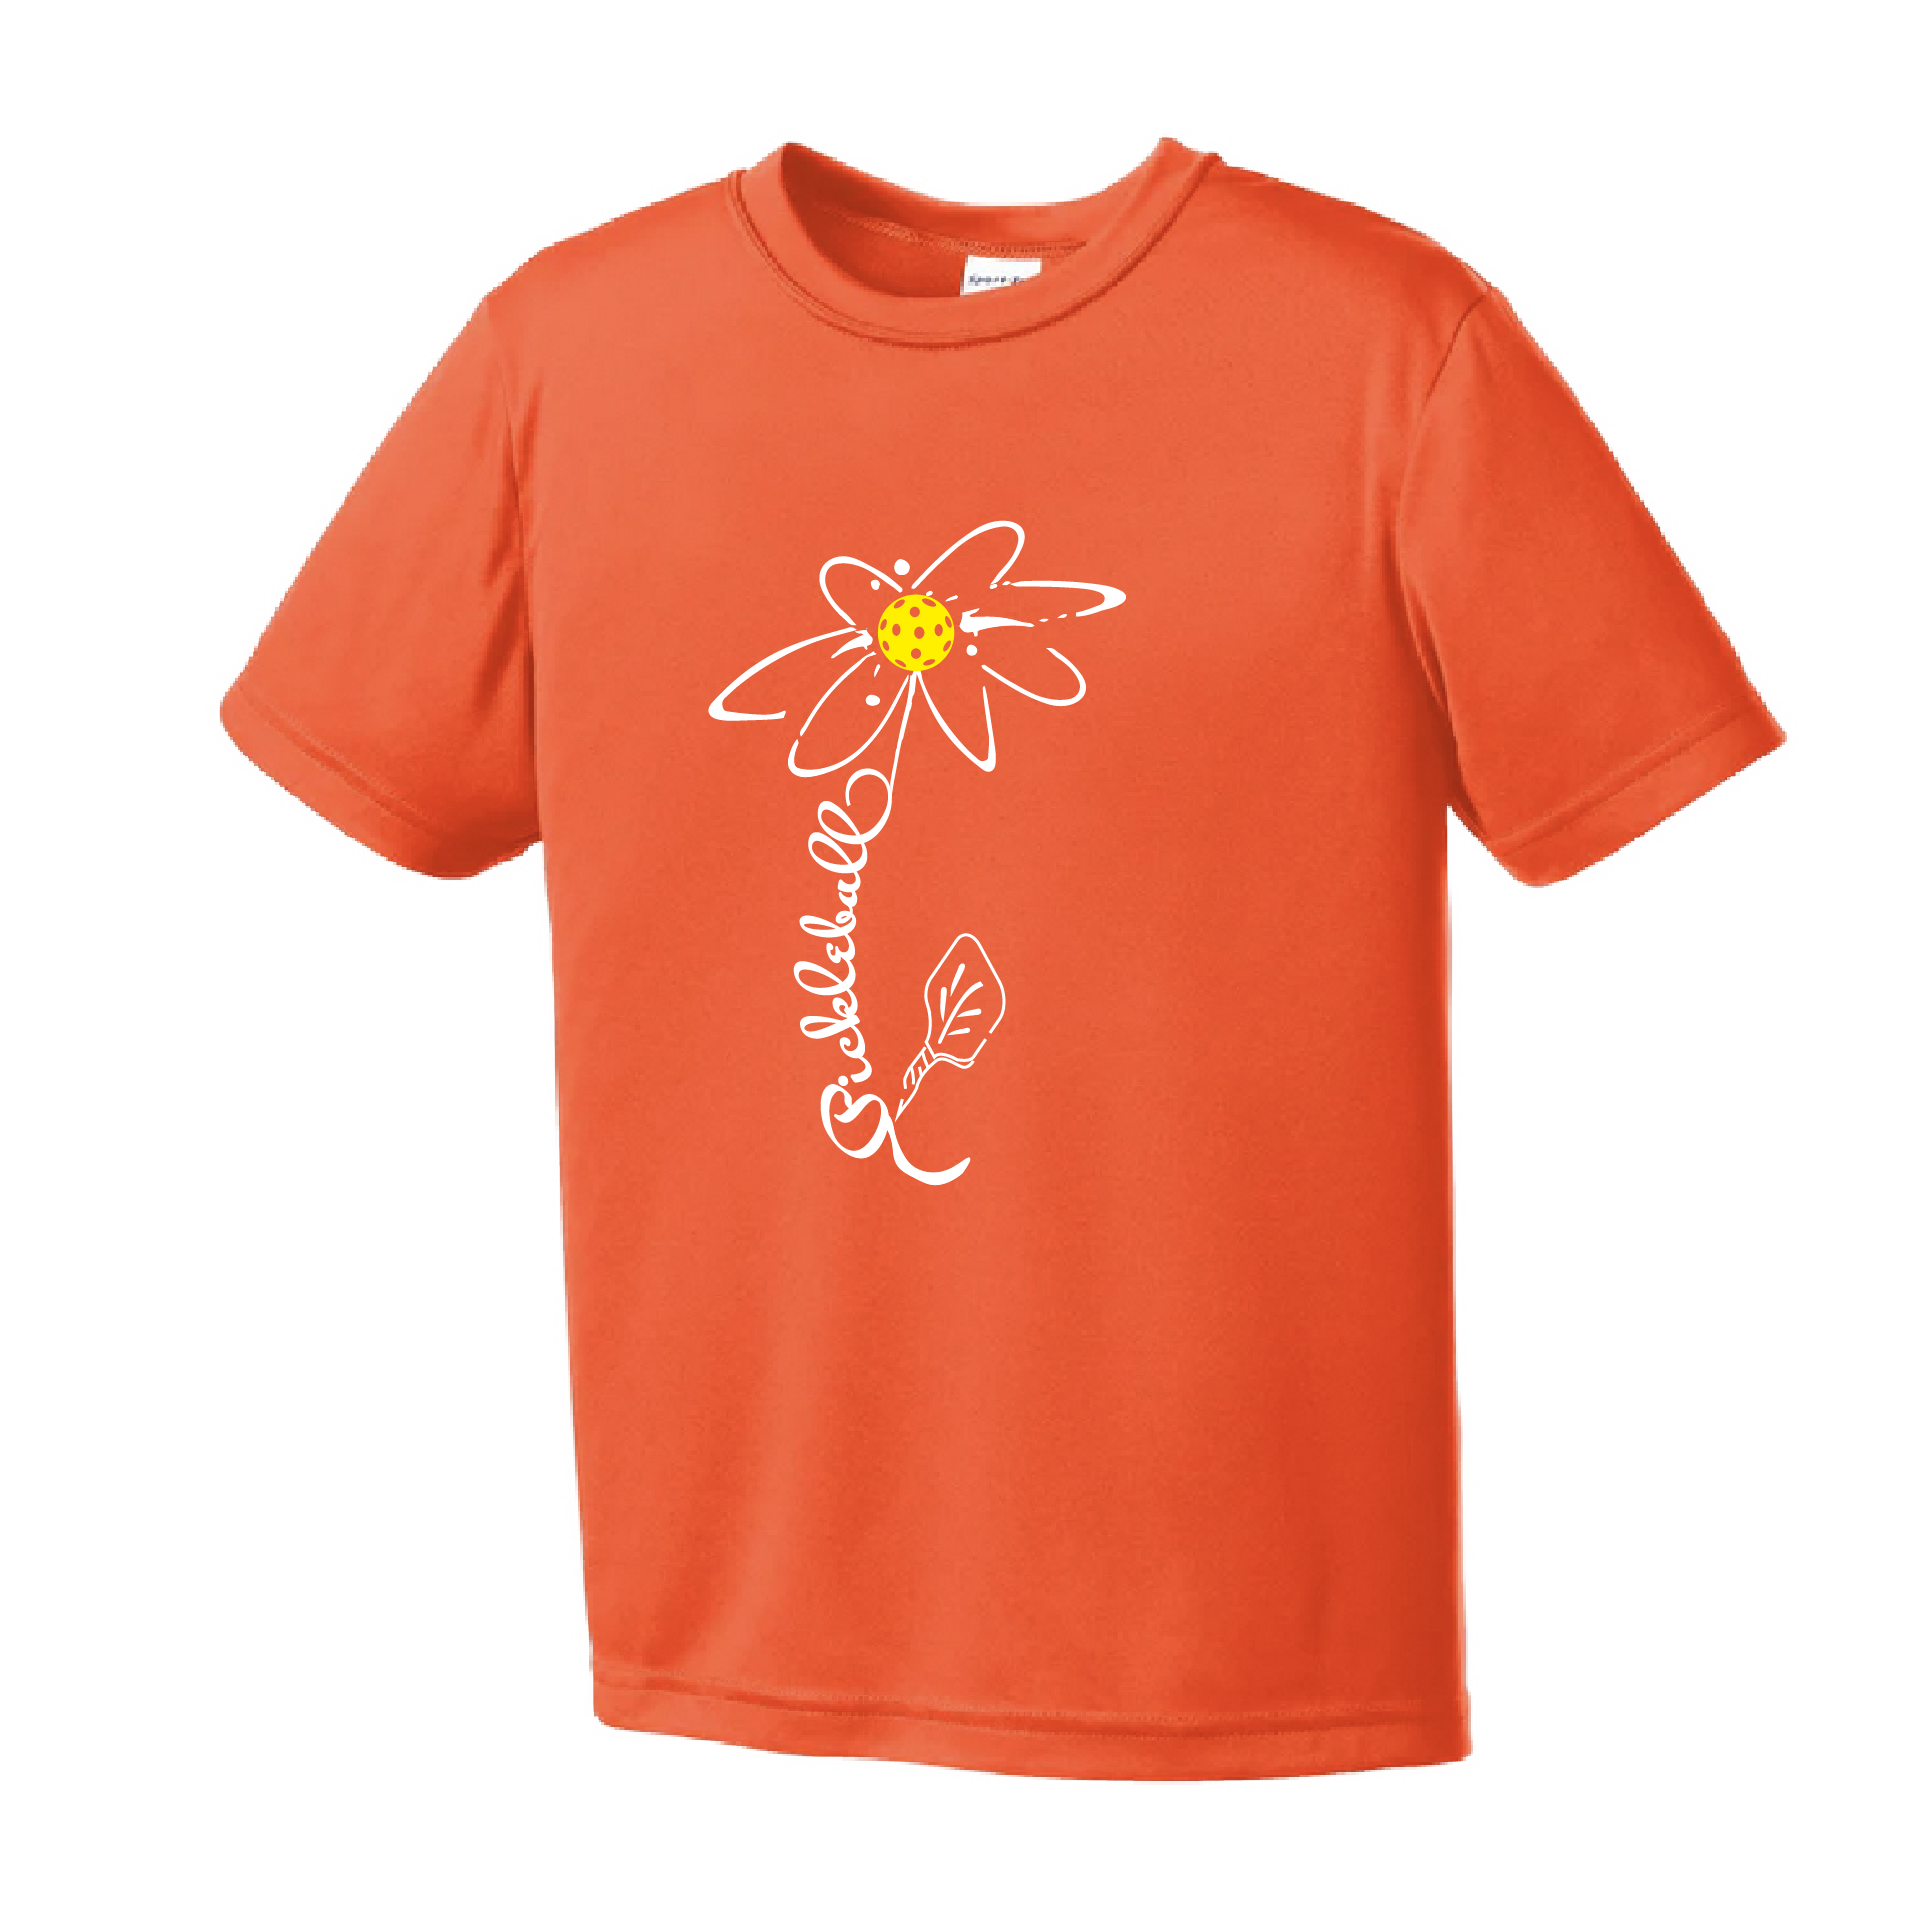 Pickleball Design: Pickleball Flower  Youth Style: Short Sleeve  Shirts are lightweight, roomy and highly breathable. These moisture-wicking shirts are designed for athletic performance. They feature PosiCharge technology to lock in color and prevent logos from fading. Removable tag and set-in sleeves for comfort.